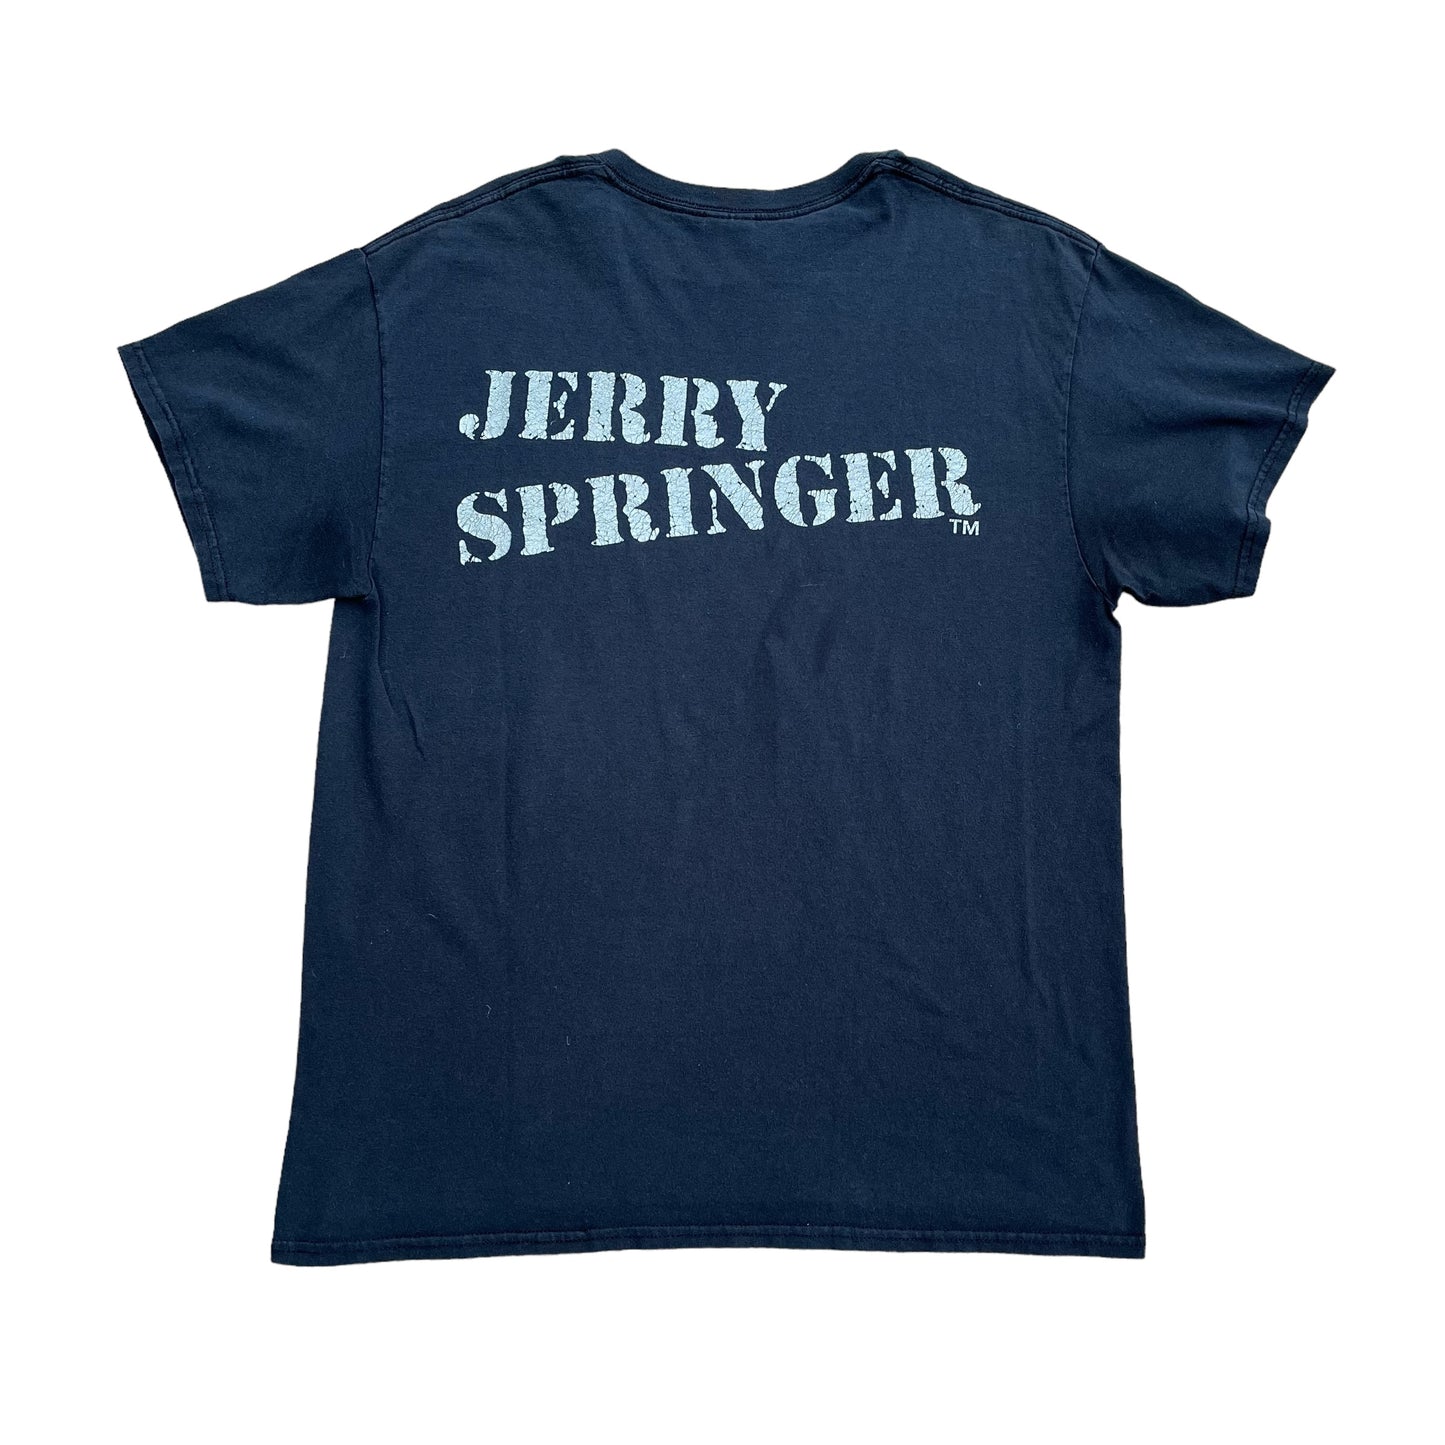 Jerry Springer tee large